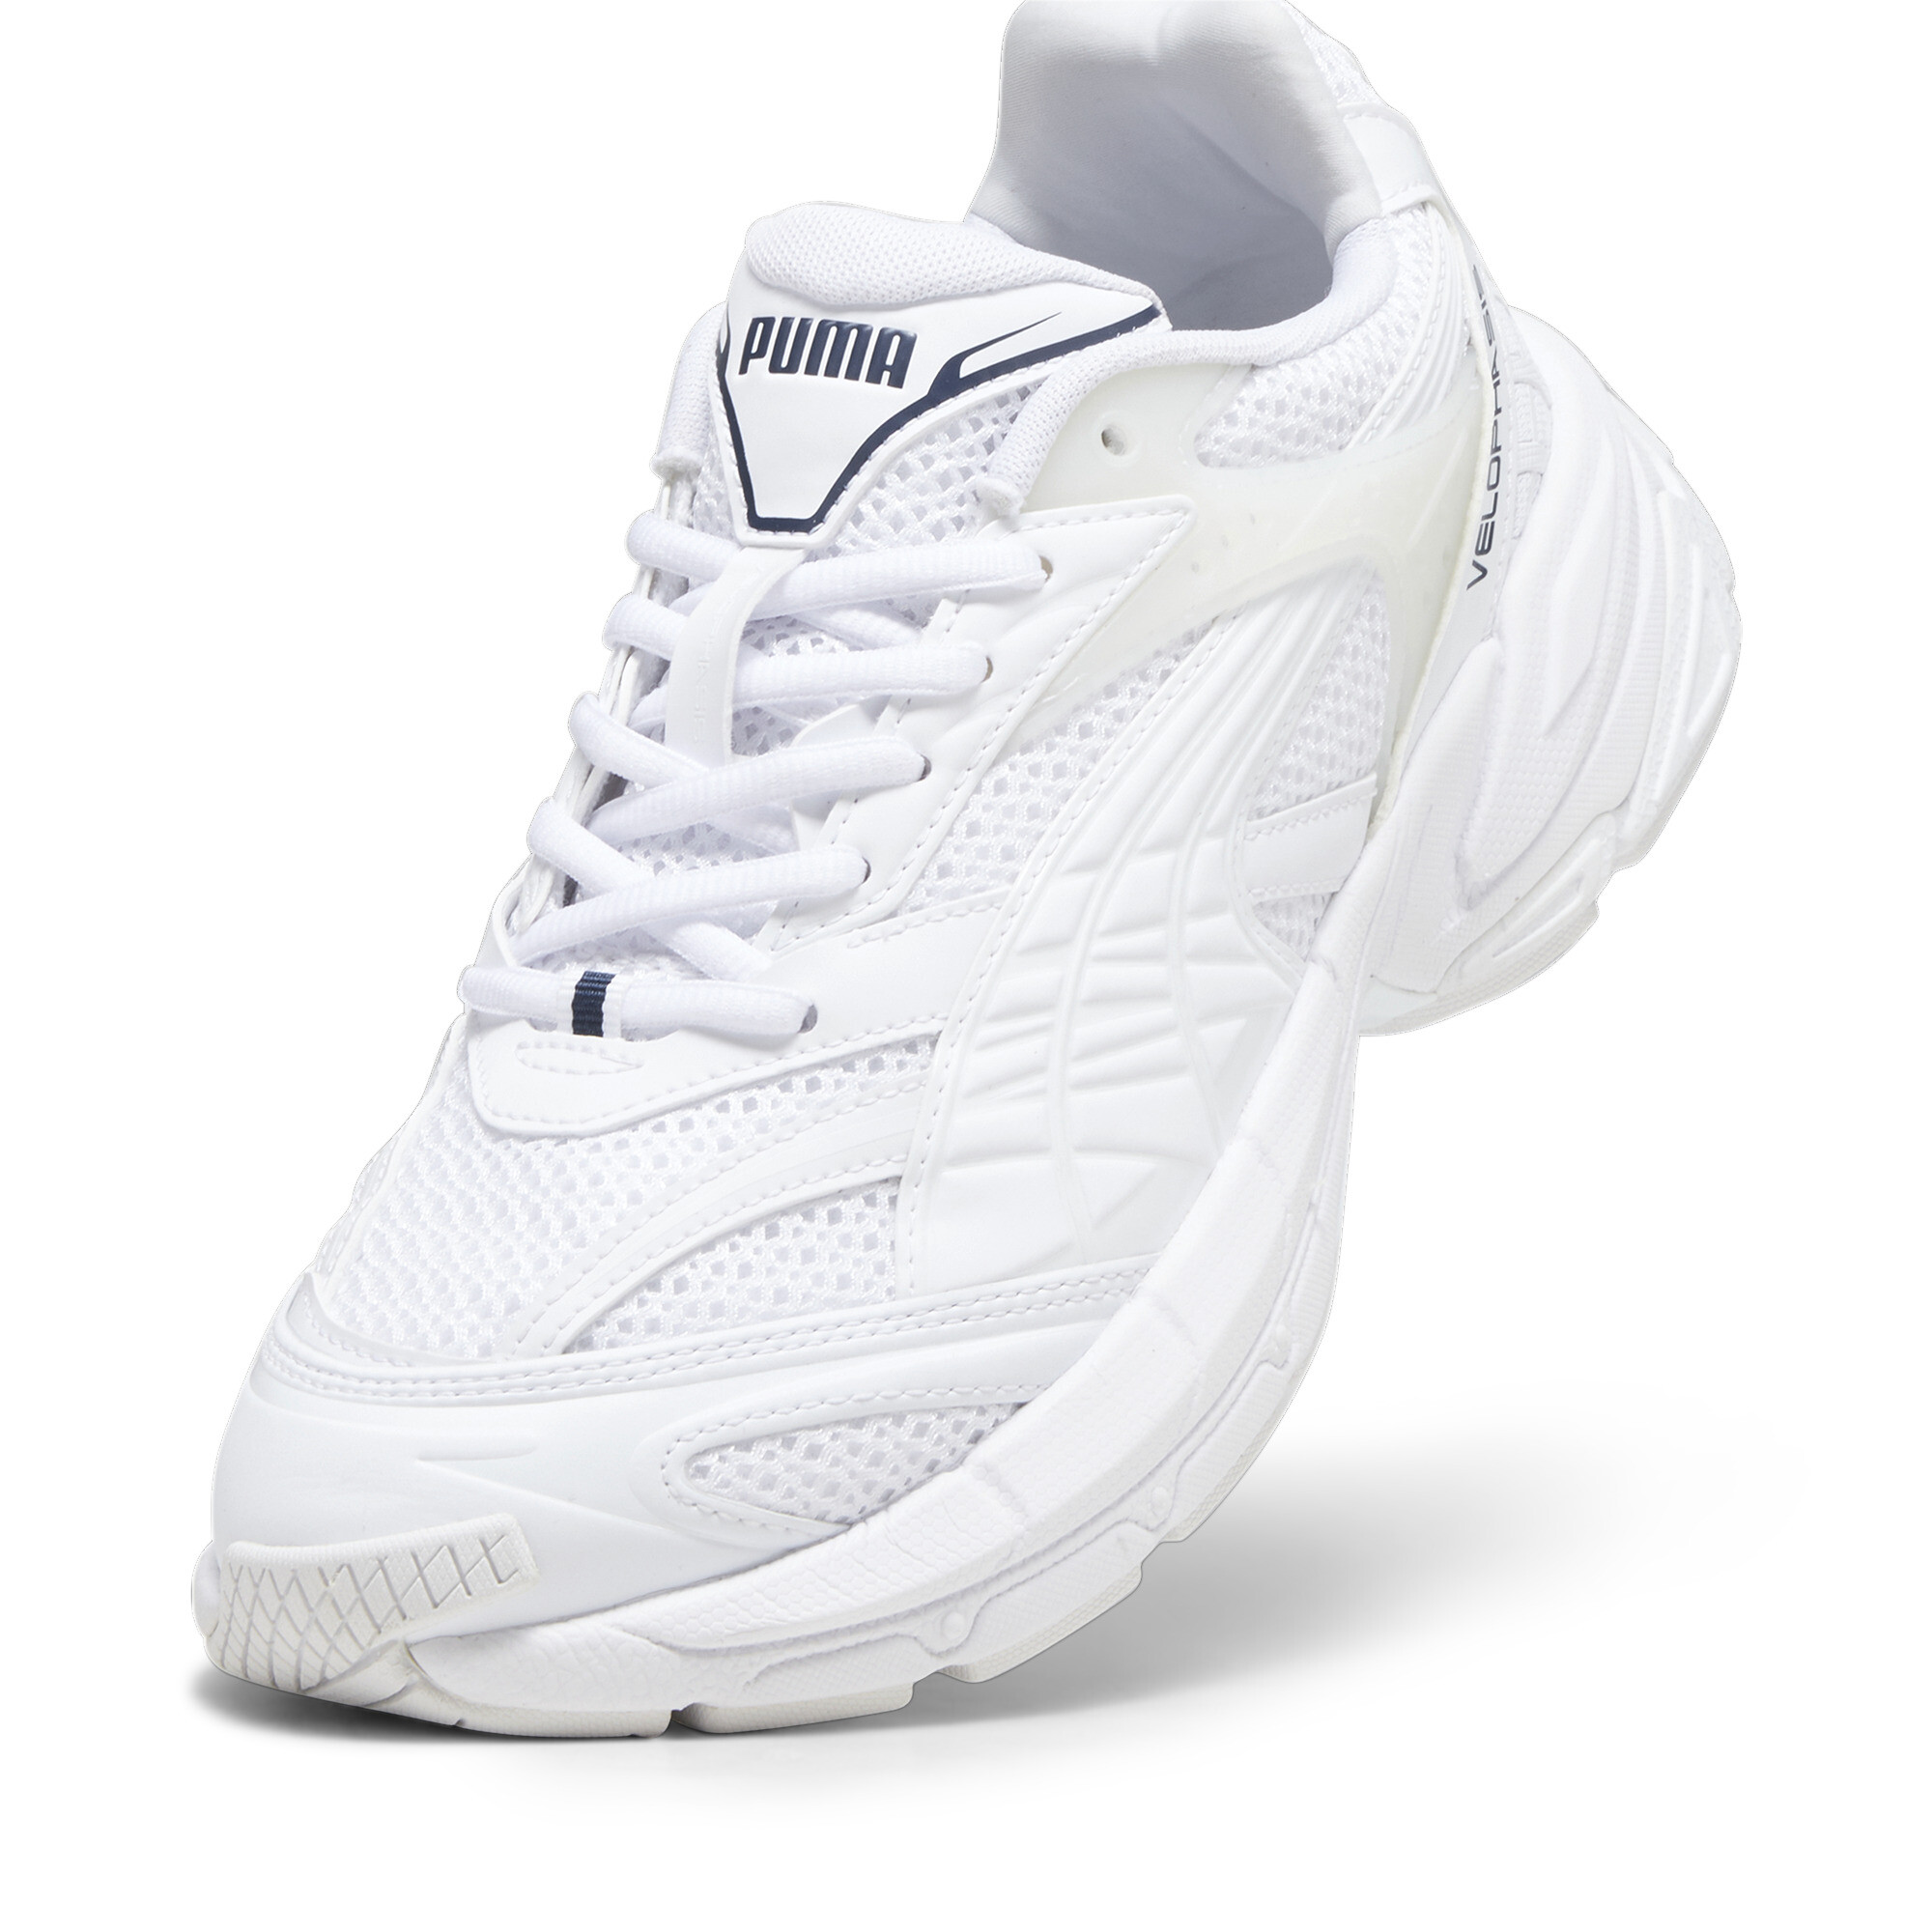 Puma Velophasis Technisch Sneakers, White, Size 44.5, Shoes